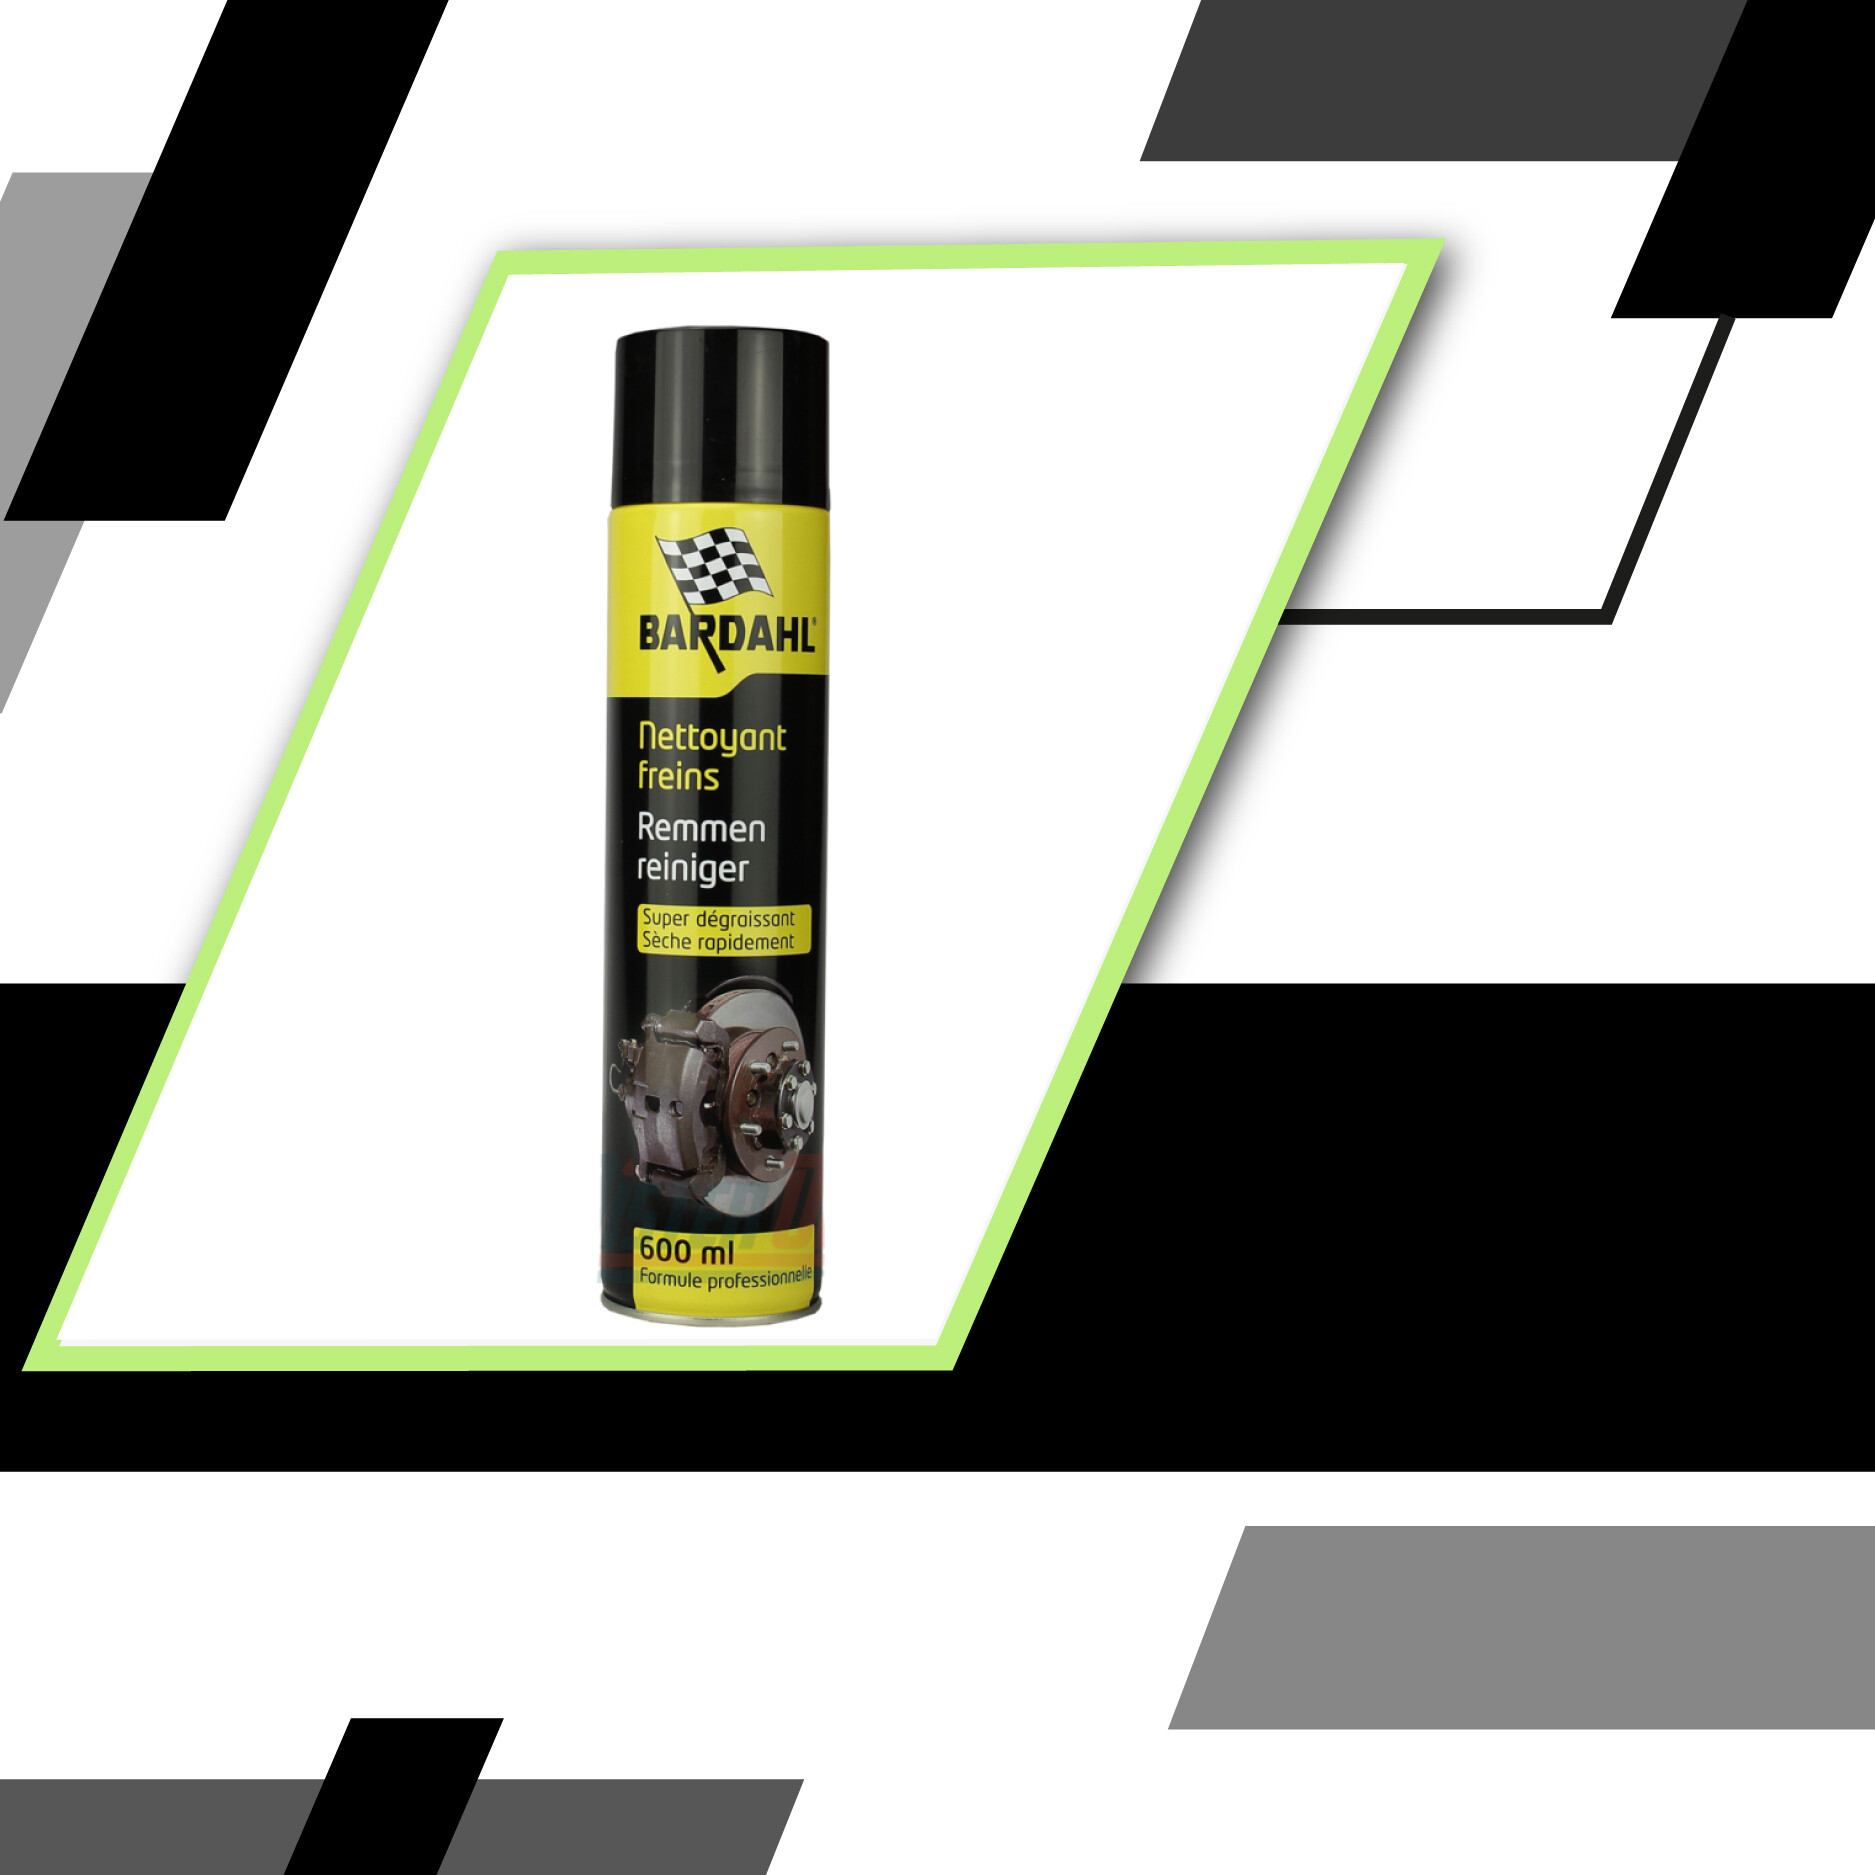 Bardahl oil and cleaning these products keep your kart in top